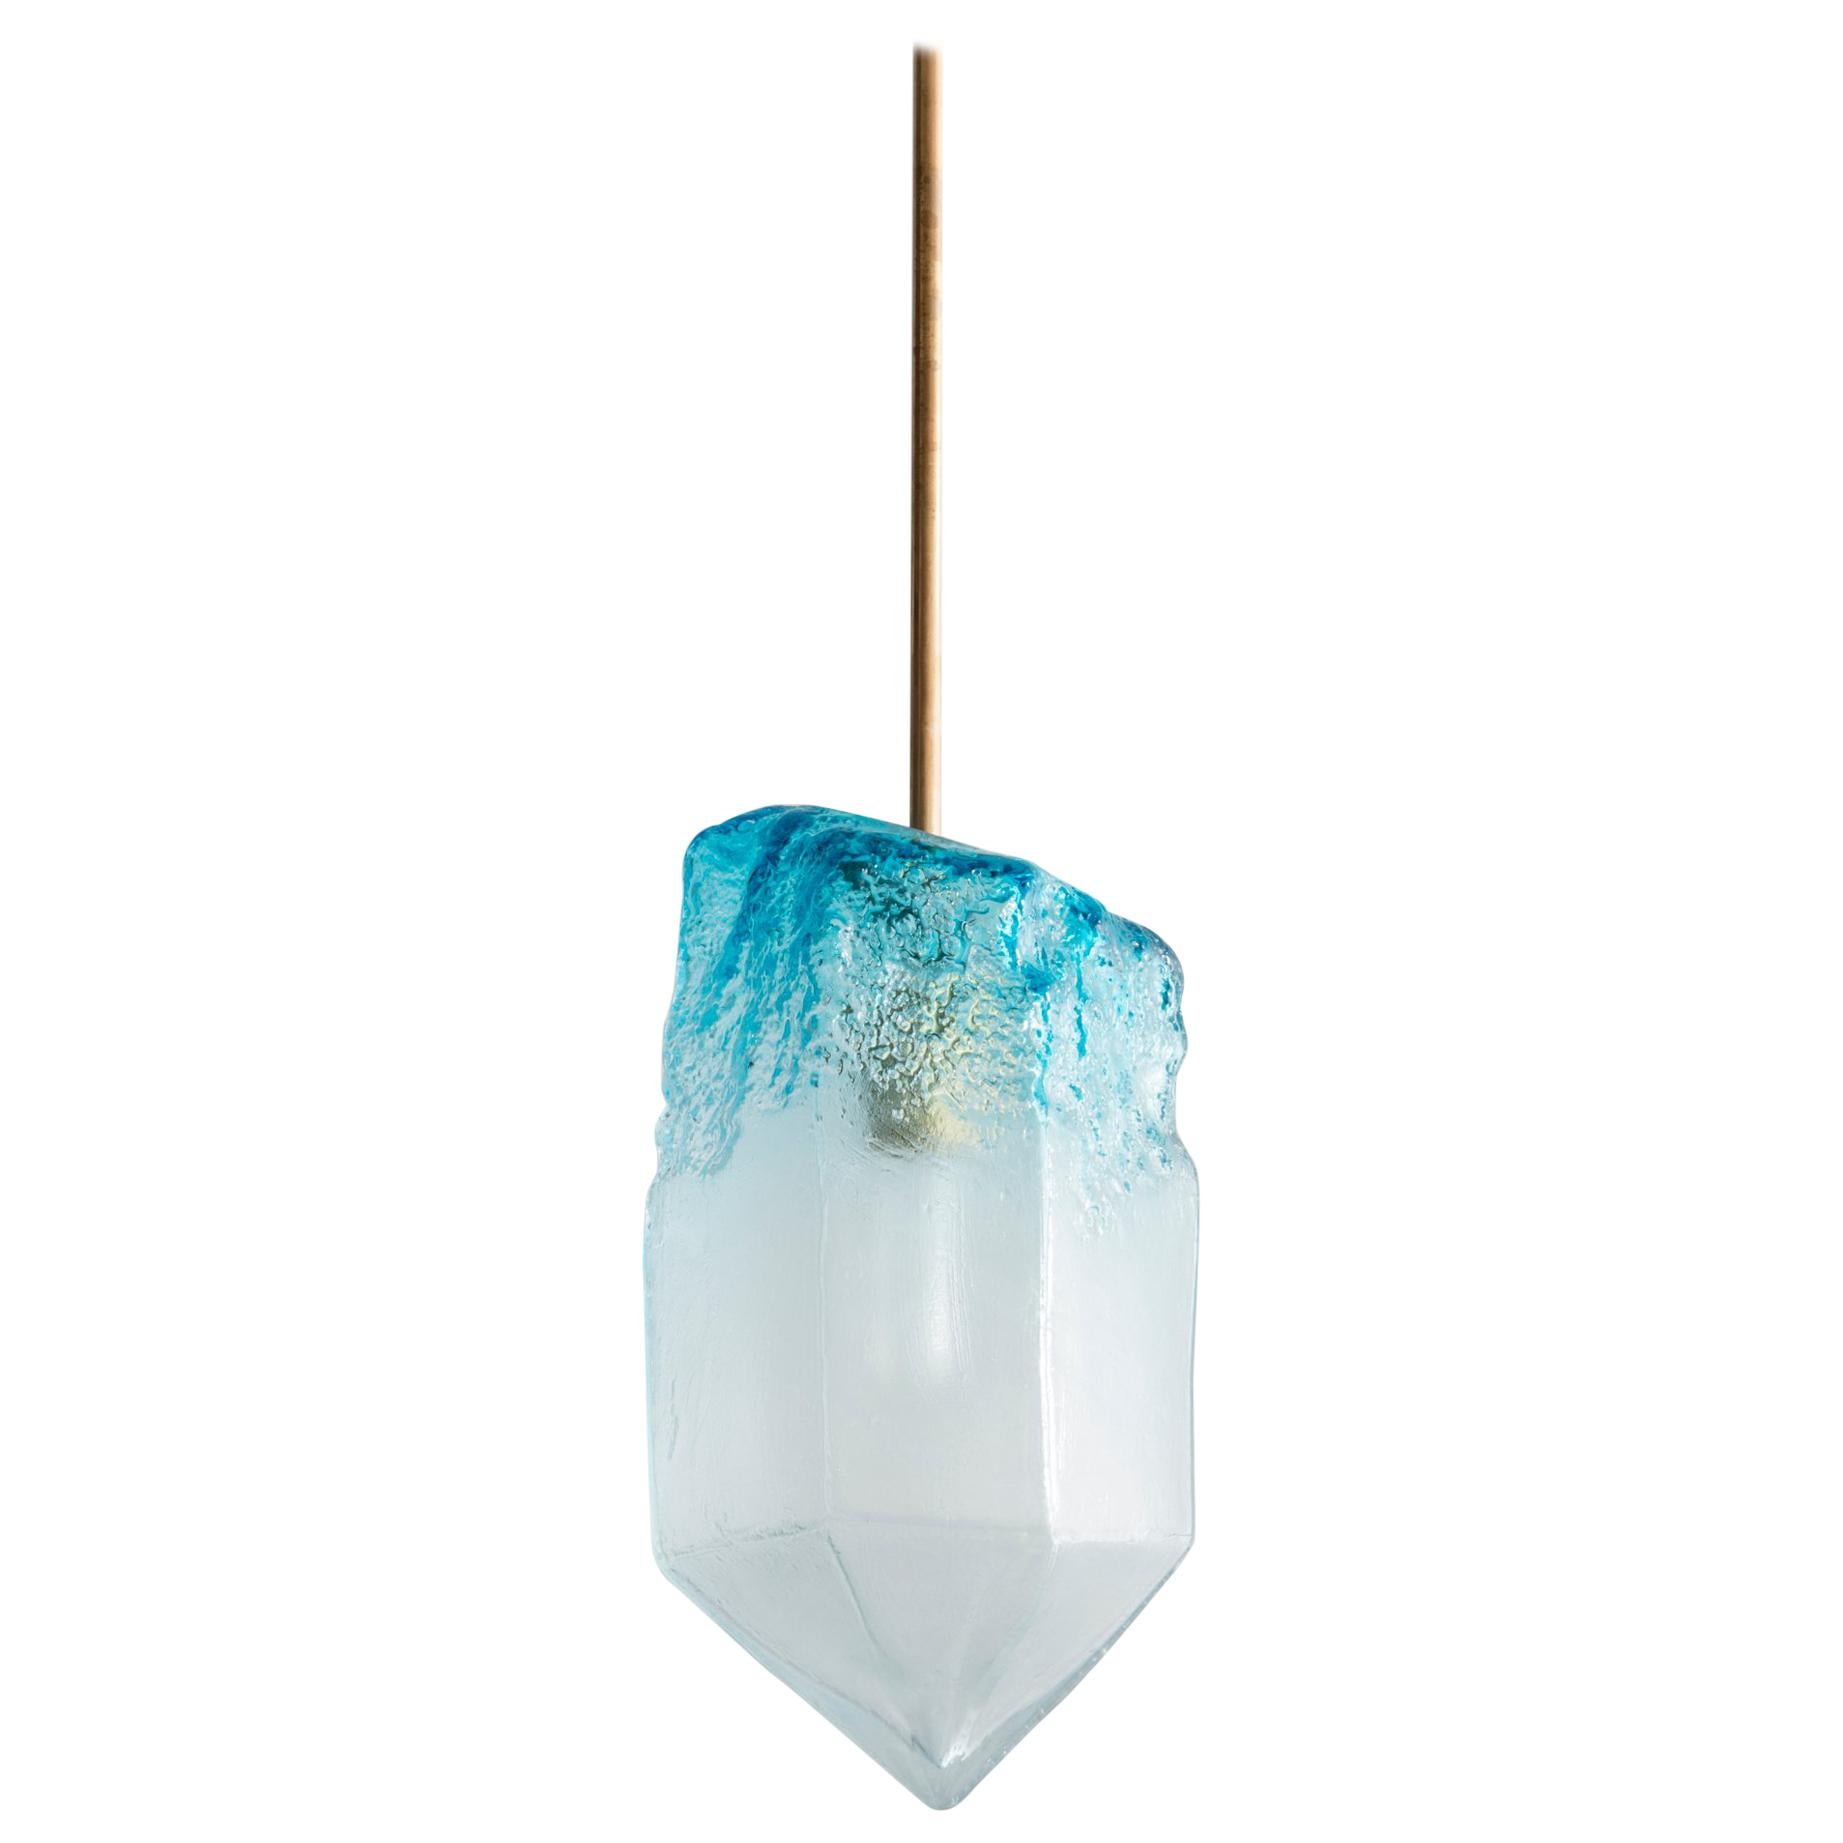 Sculptural Pendant Light in Turquoise and Nickel by Jeff Zimmerman, 2016